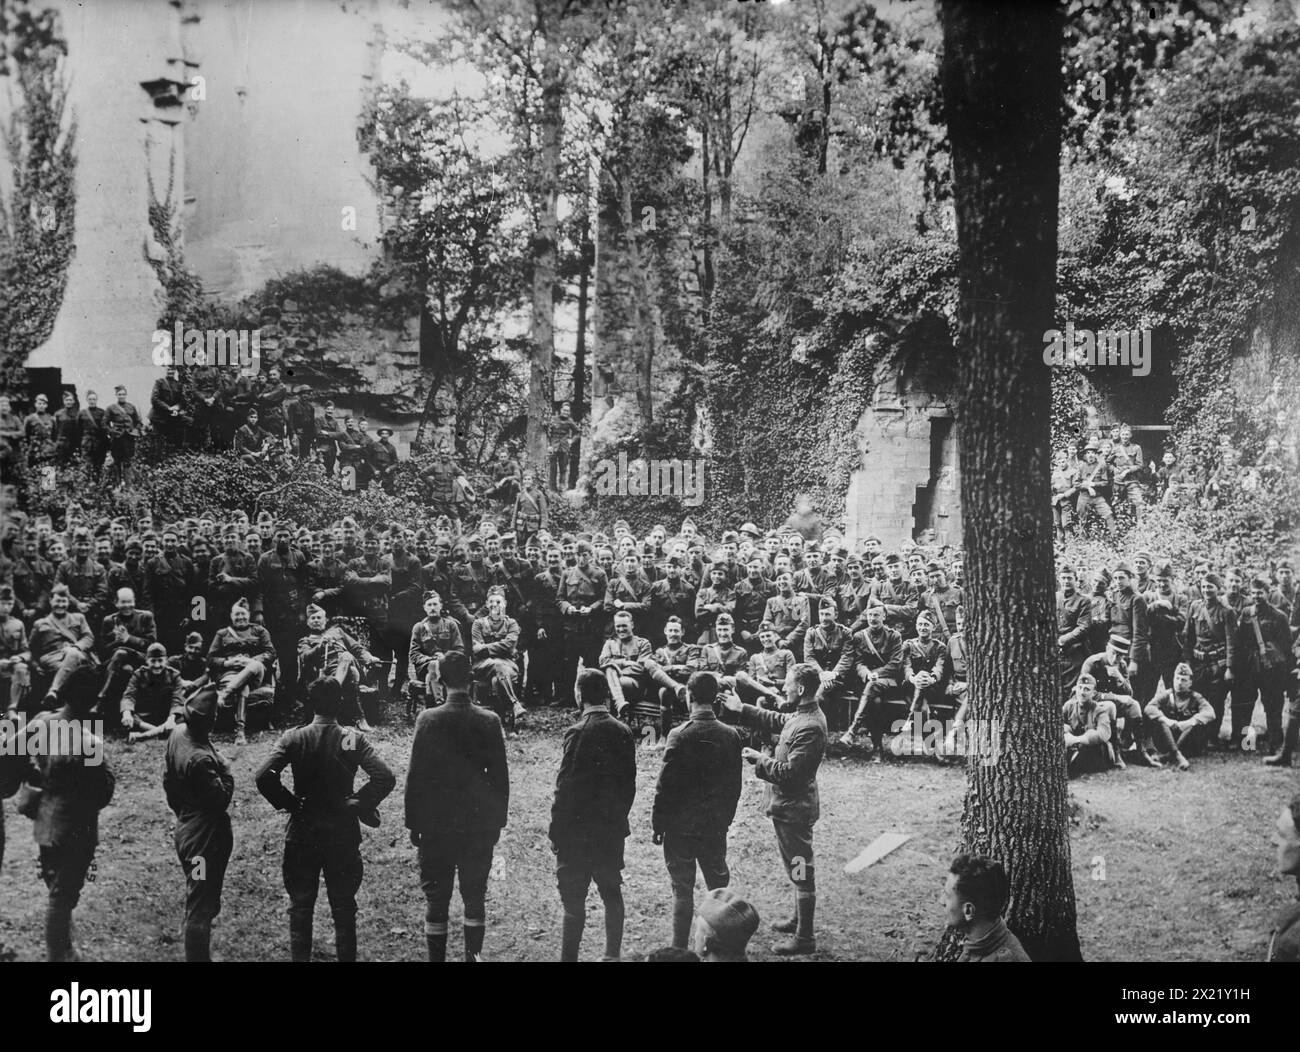 77th Div. Band plays for Gen. R. Alexander, France, 27 Aug 1918. The 77th Division concert band, orchestra and players entertaining Major General Robert Alexander (1863-1941) and Colonel John Robert Rigby Hannay (1875-1938) in the ruins of Chateau Fere, near Fere en Tardenois, Aisne, France, August 27, 1918 during World War I. Stock Photo